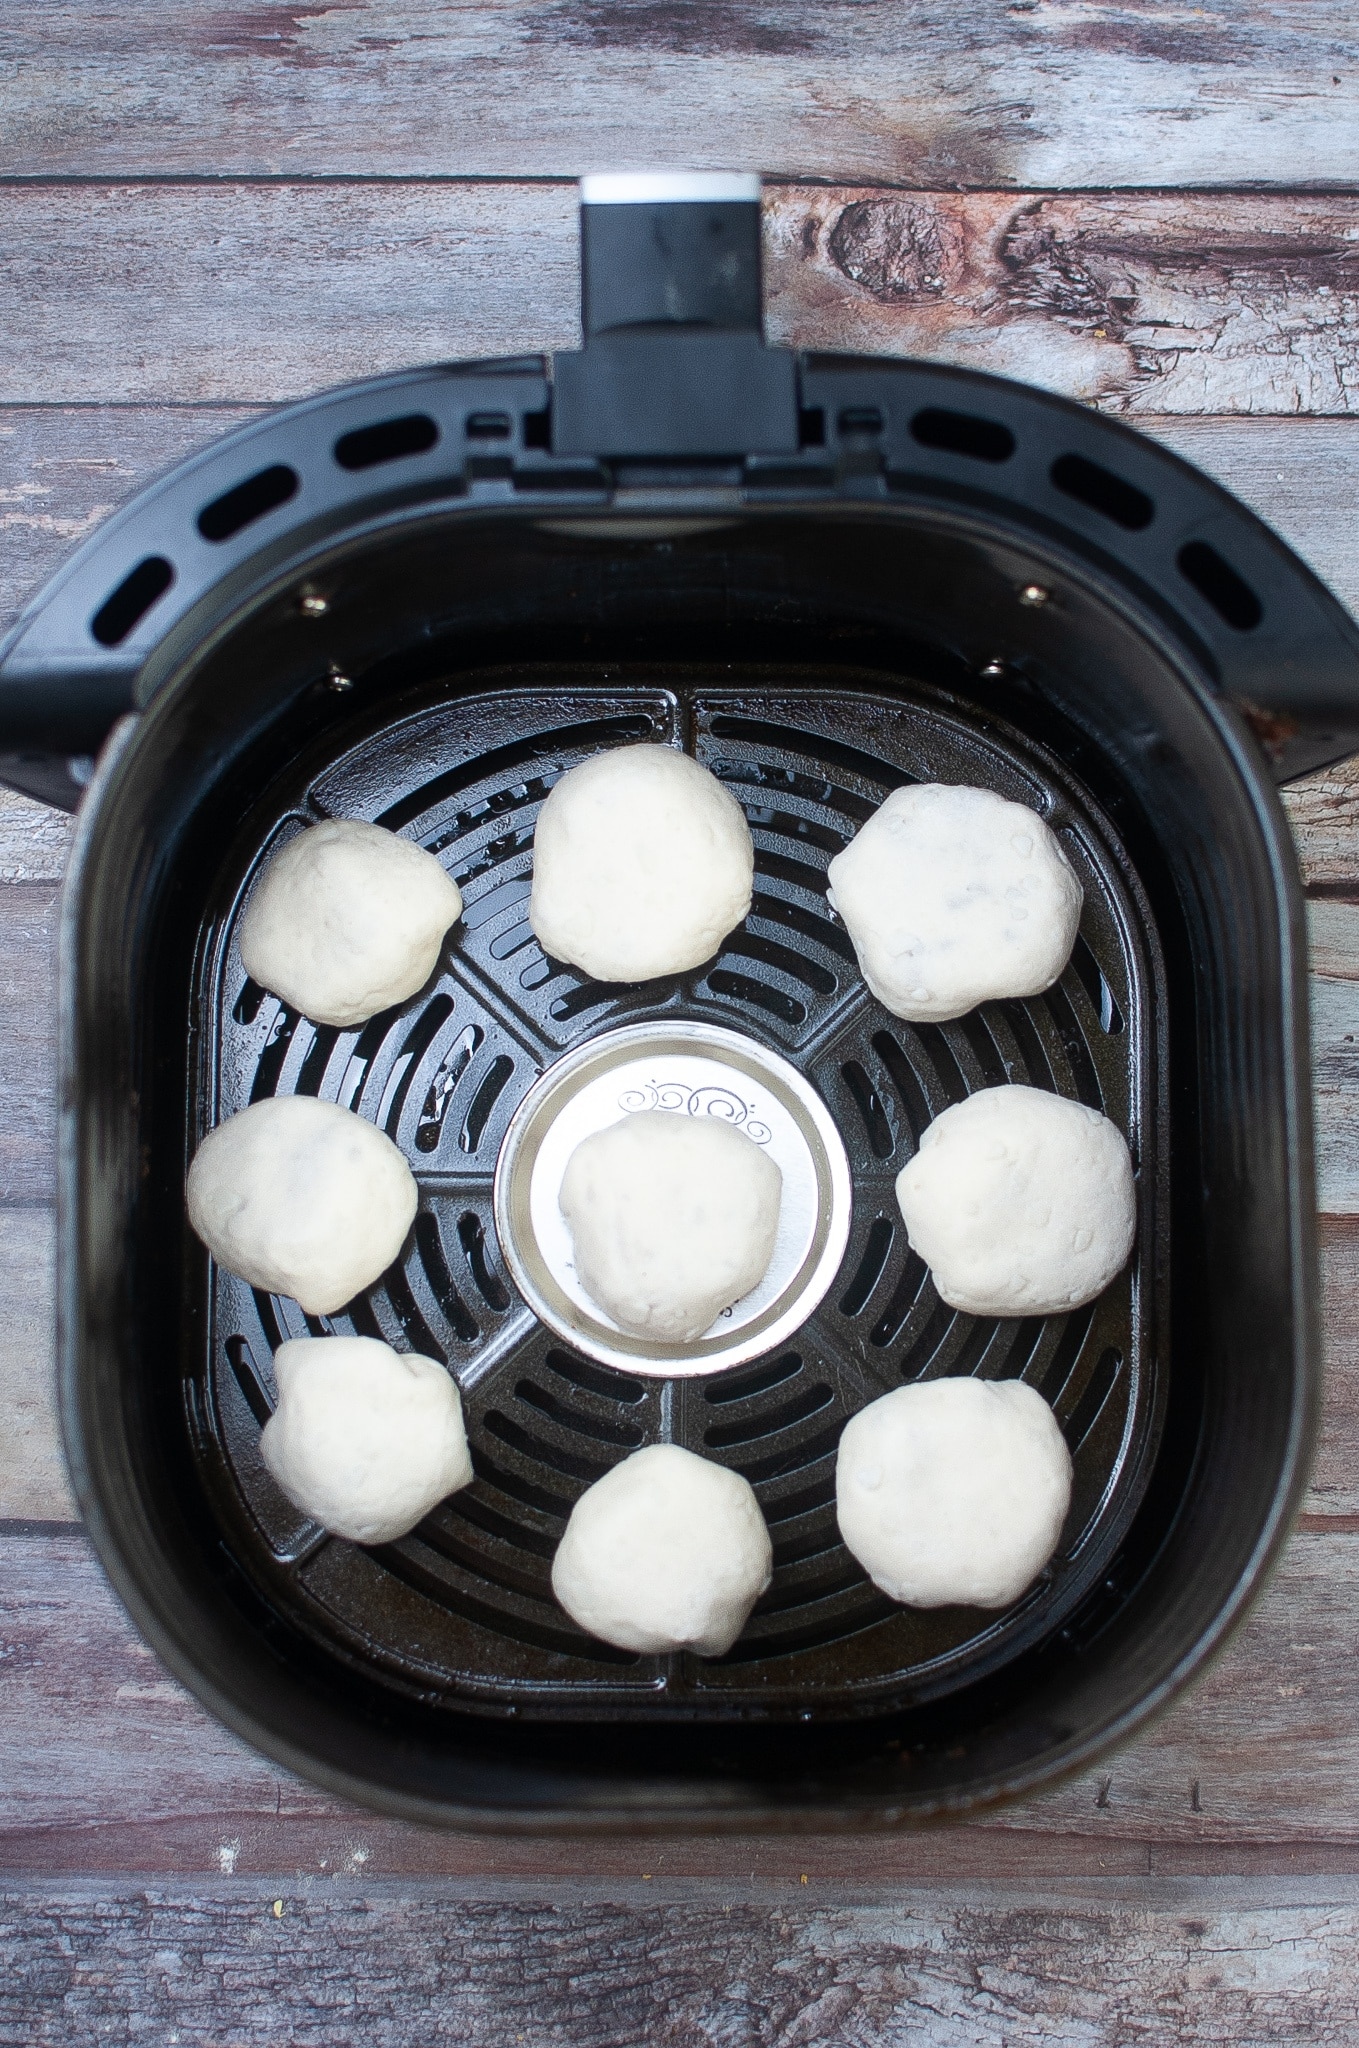 stuffed biscuits spaced out in the air fryer basket